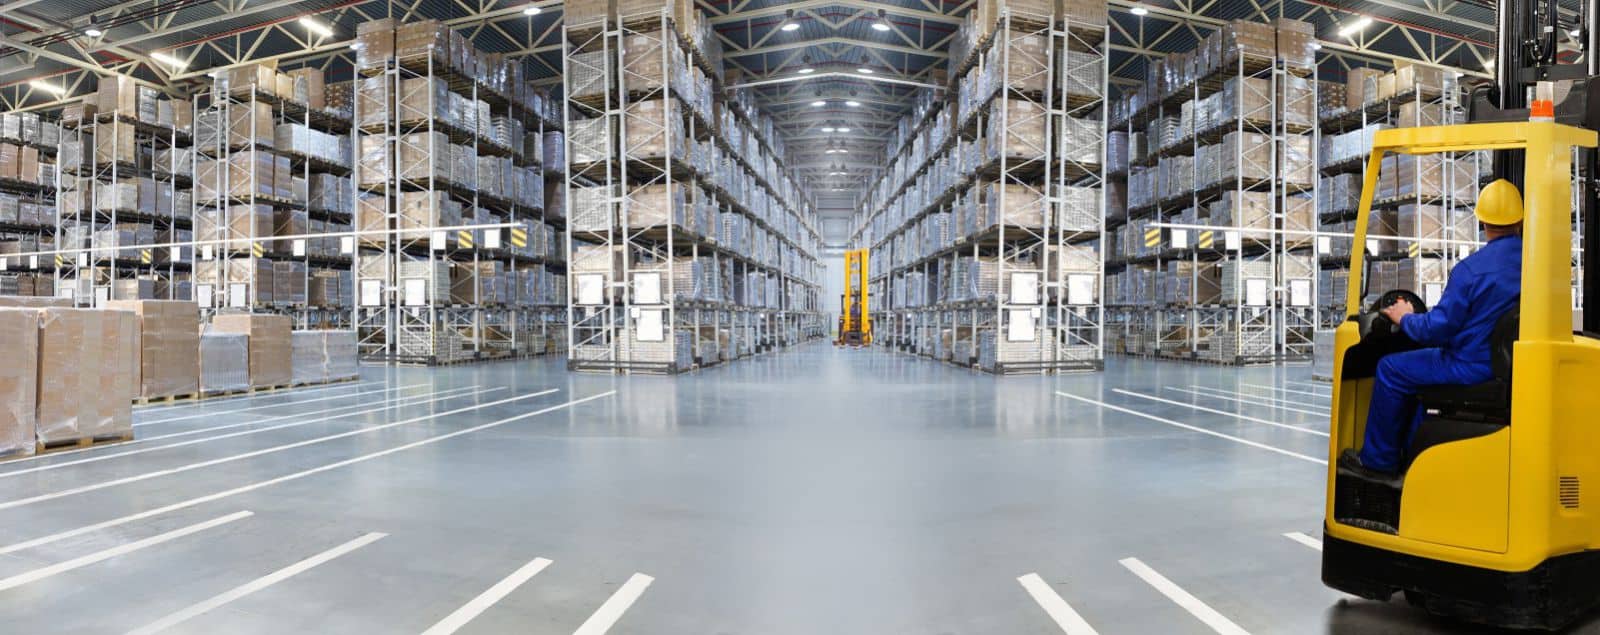 Using MMA floor coatings and the benefits